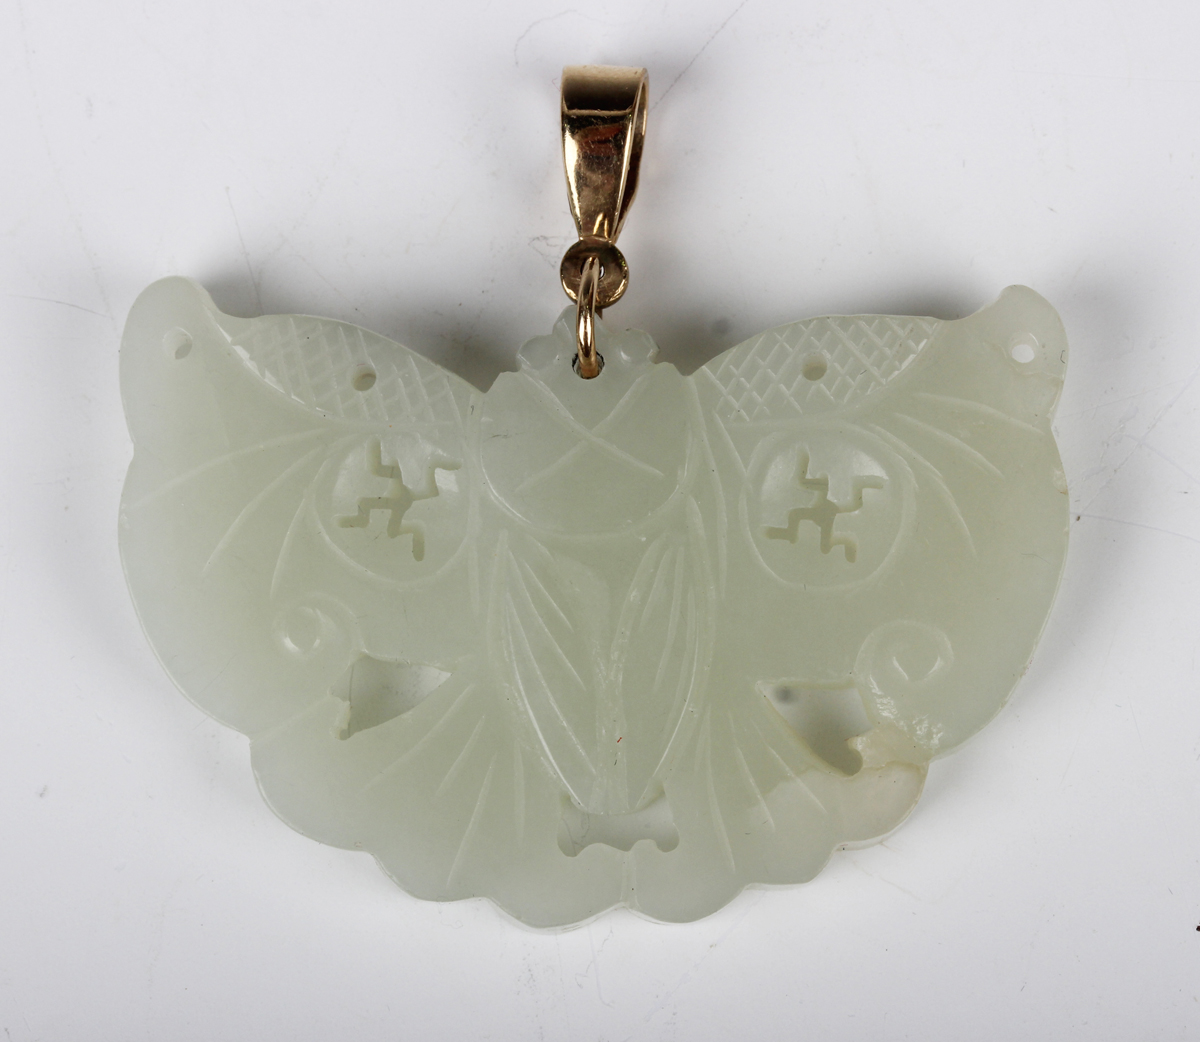 A Chinese pale celadon jade pendant, probably 20th century, carved and pierced in the form of a